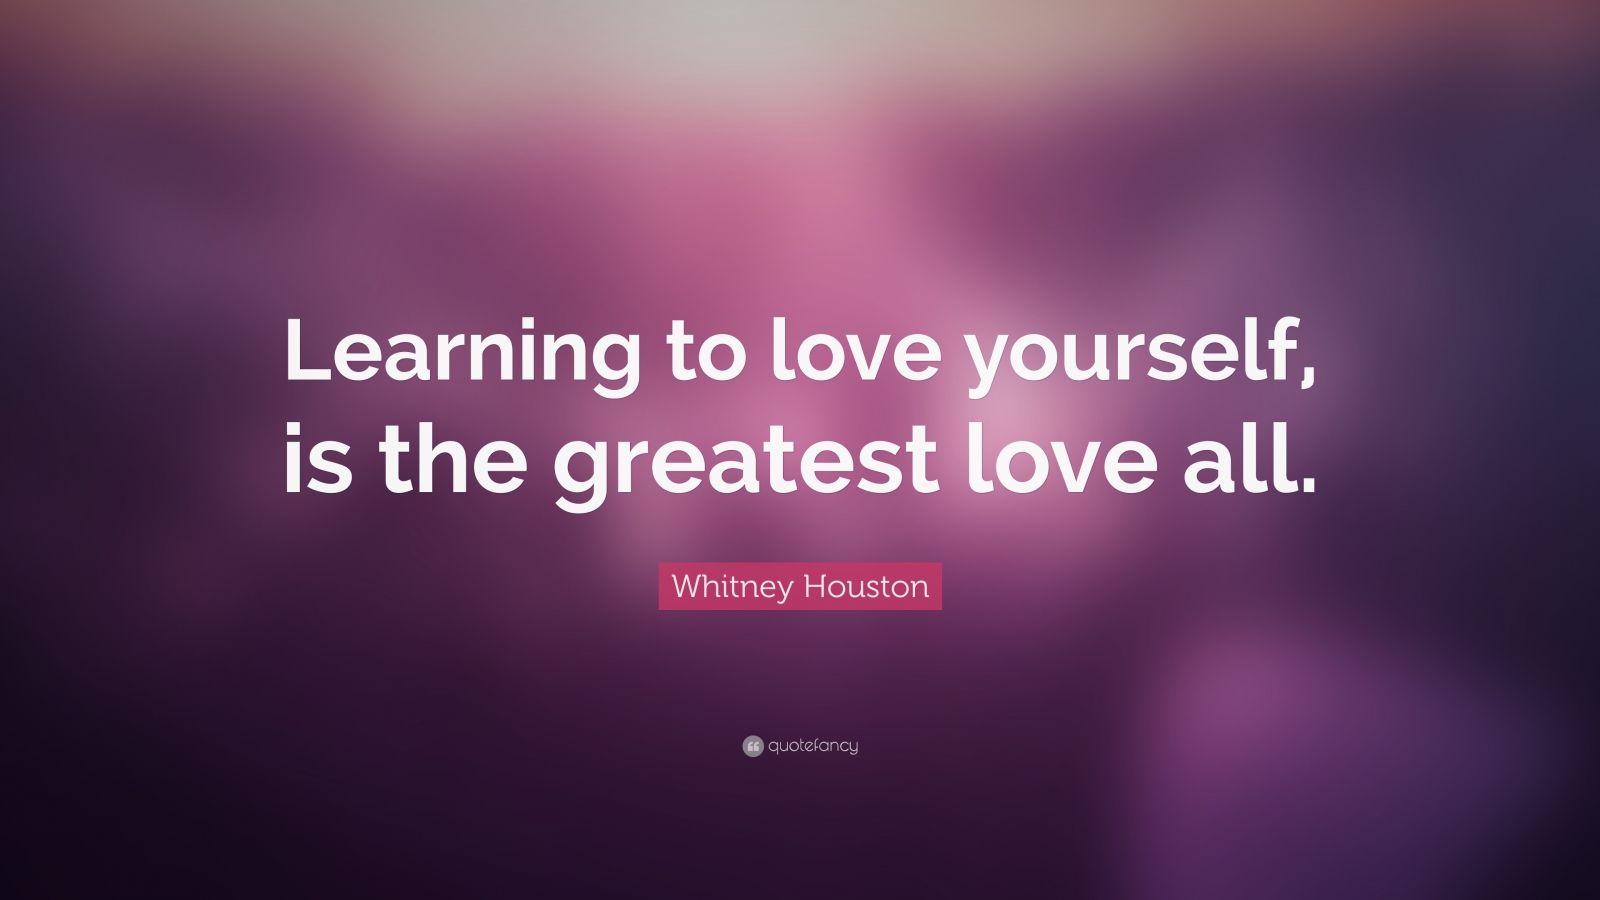 Whitney Houston Quote: “Learning to love yourself, is the greatest love ...